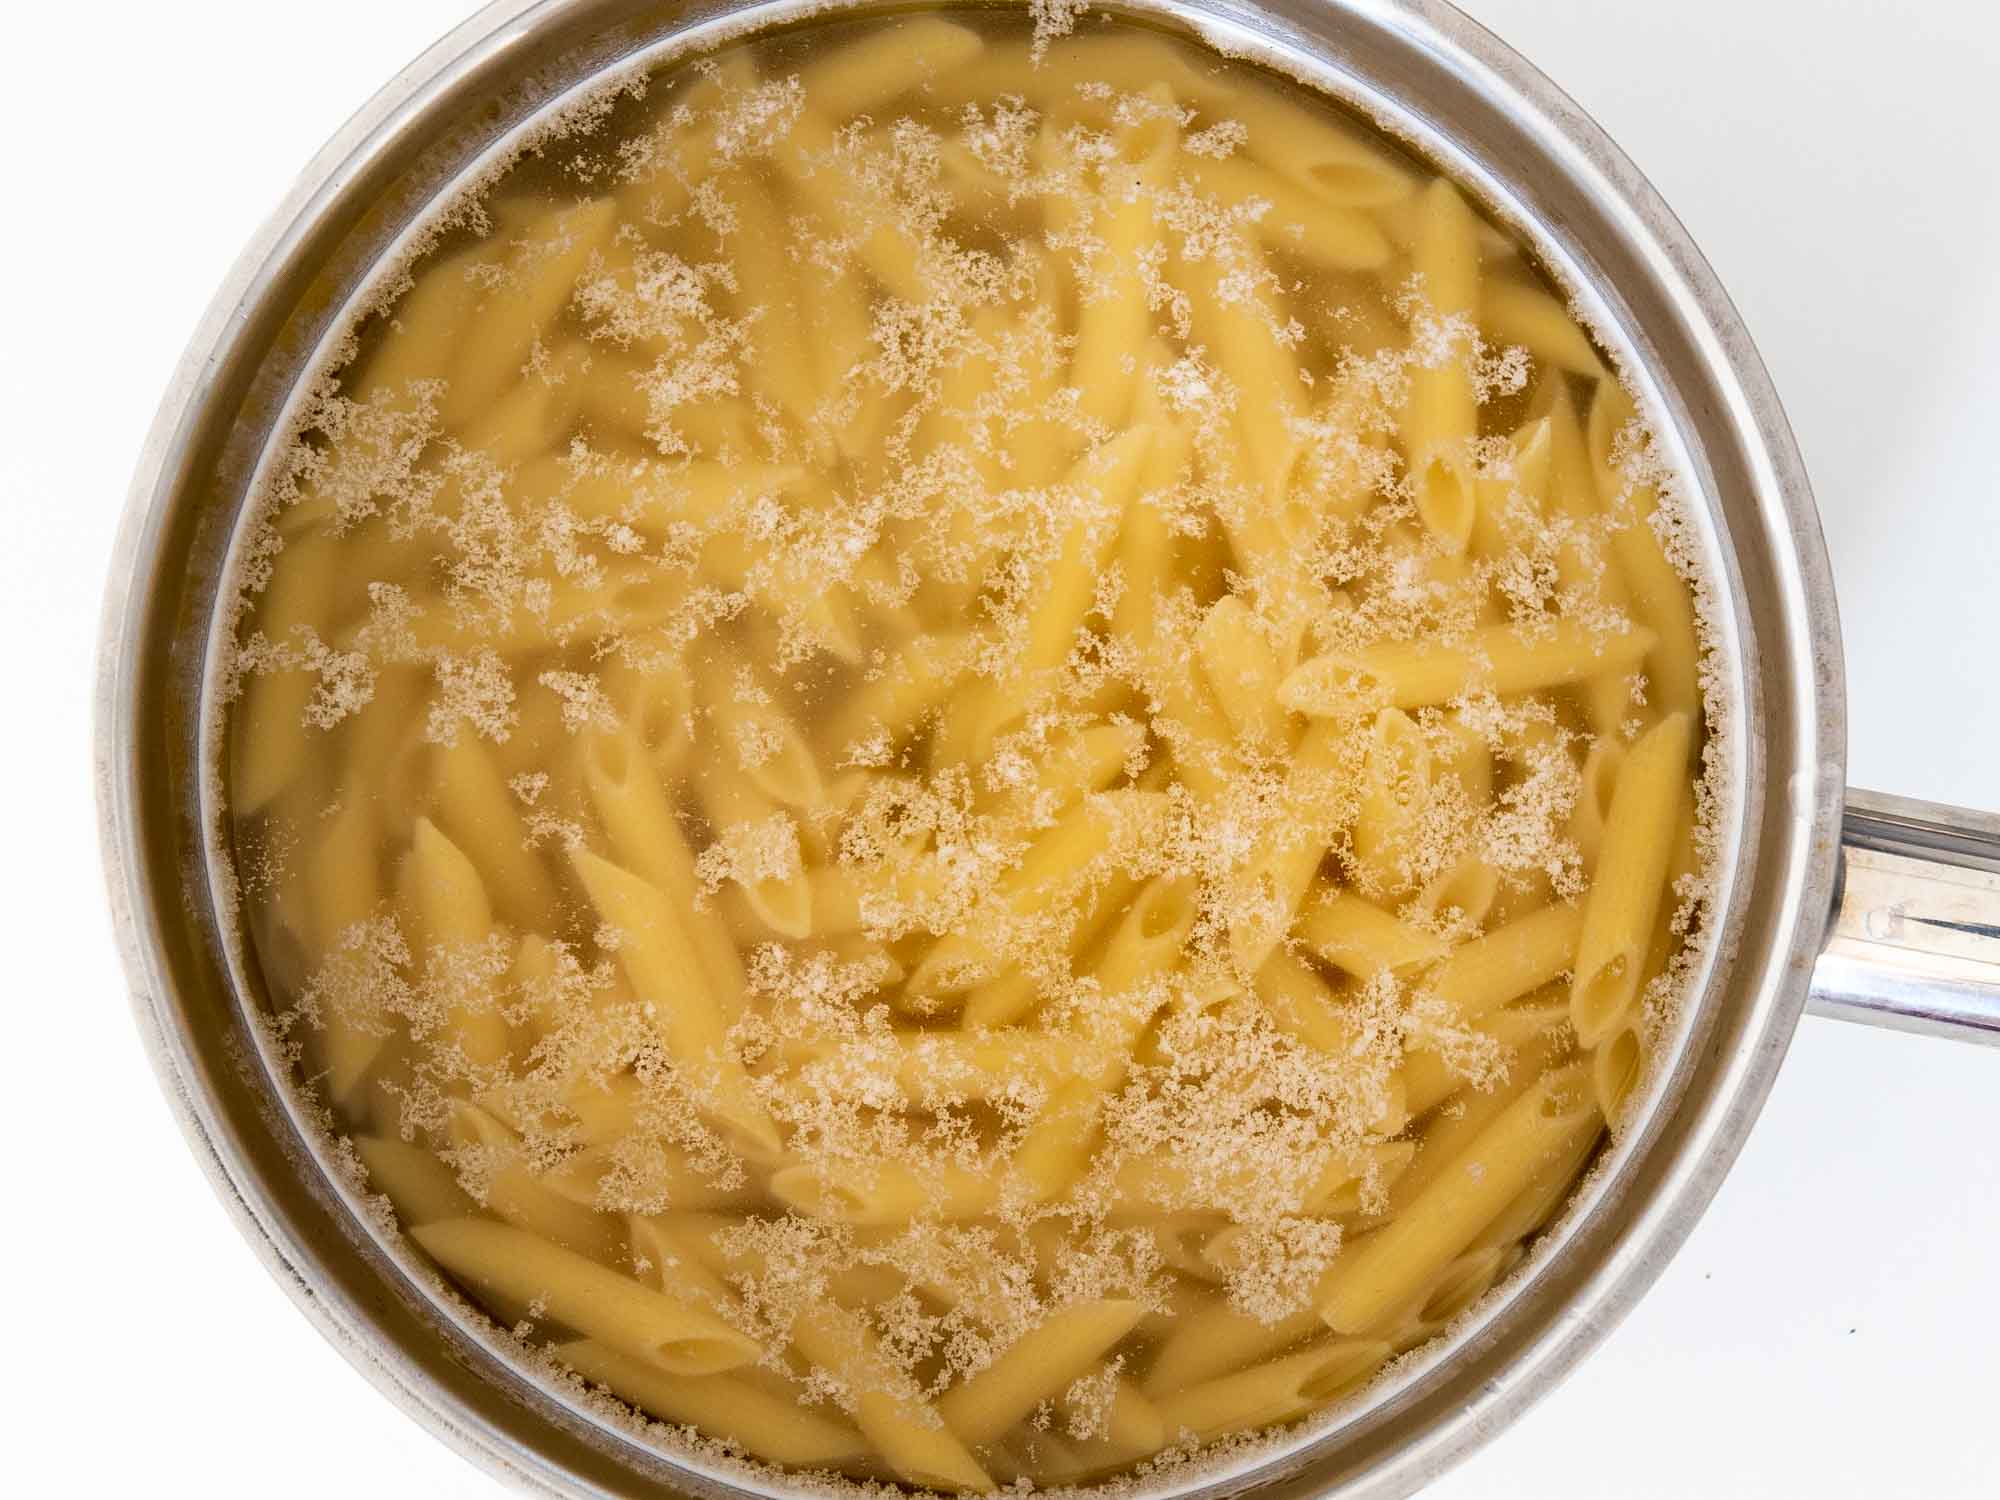 pasta in a pot of boiling water.